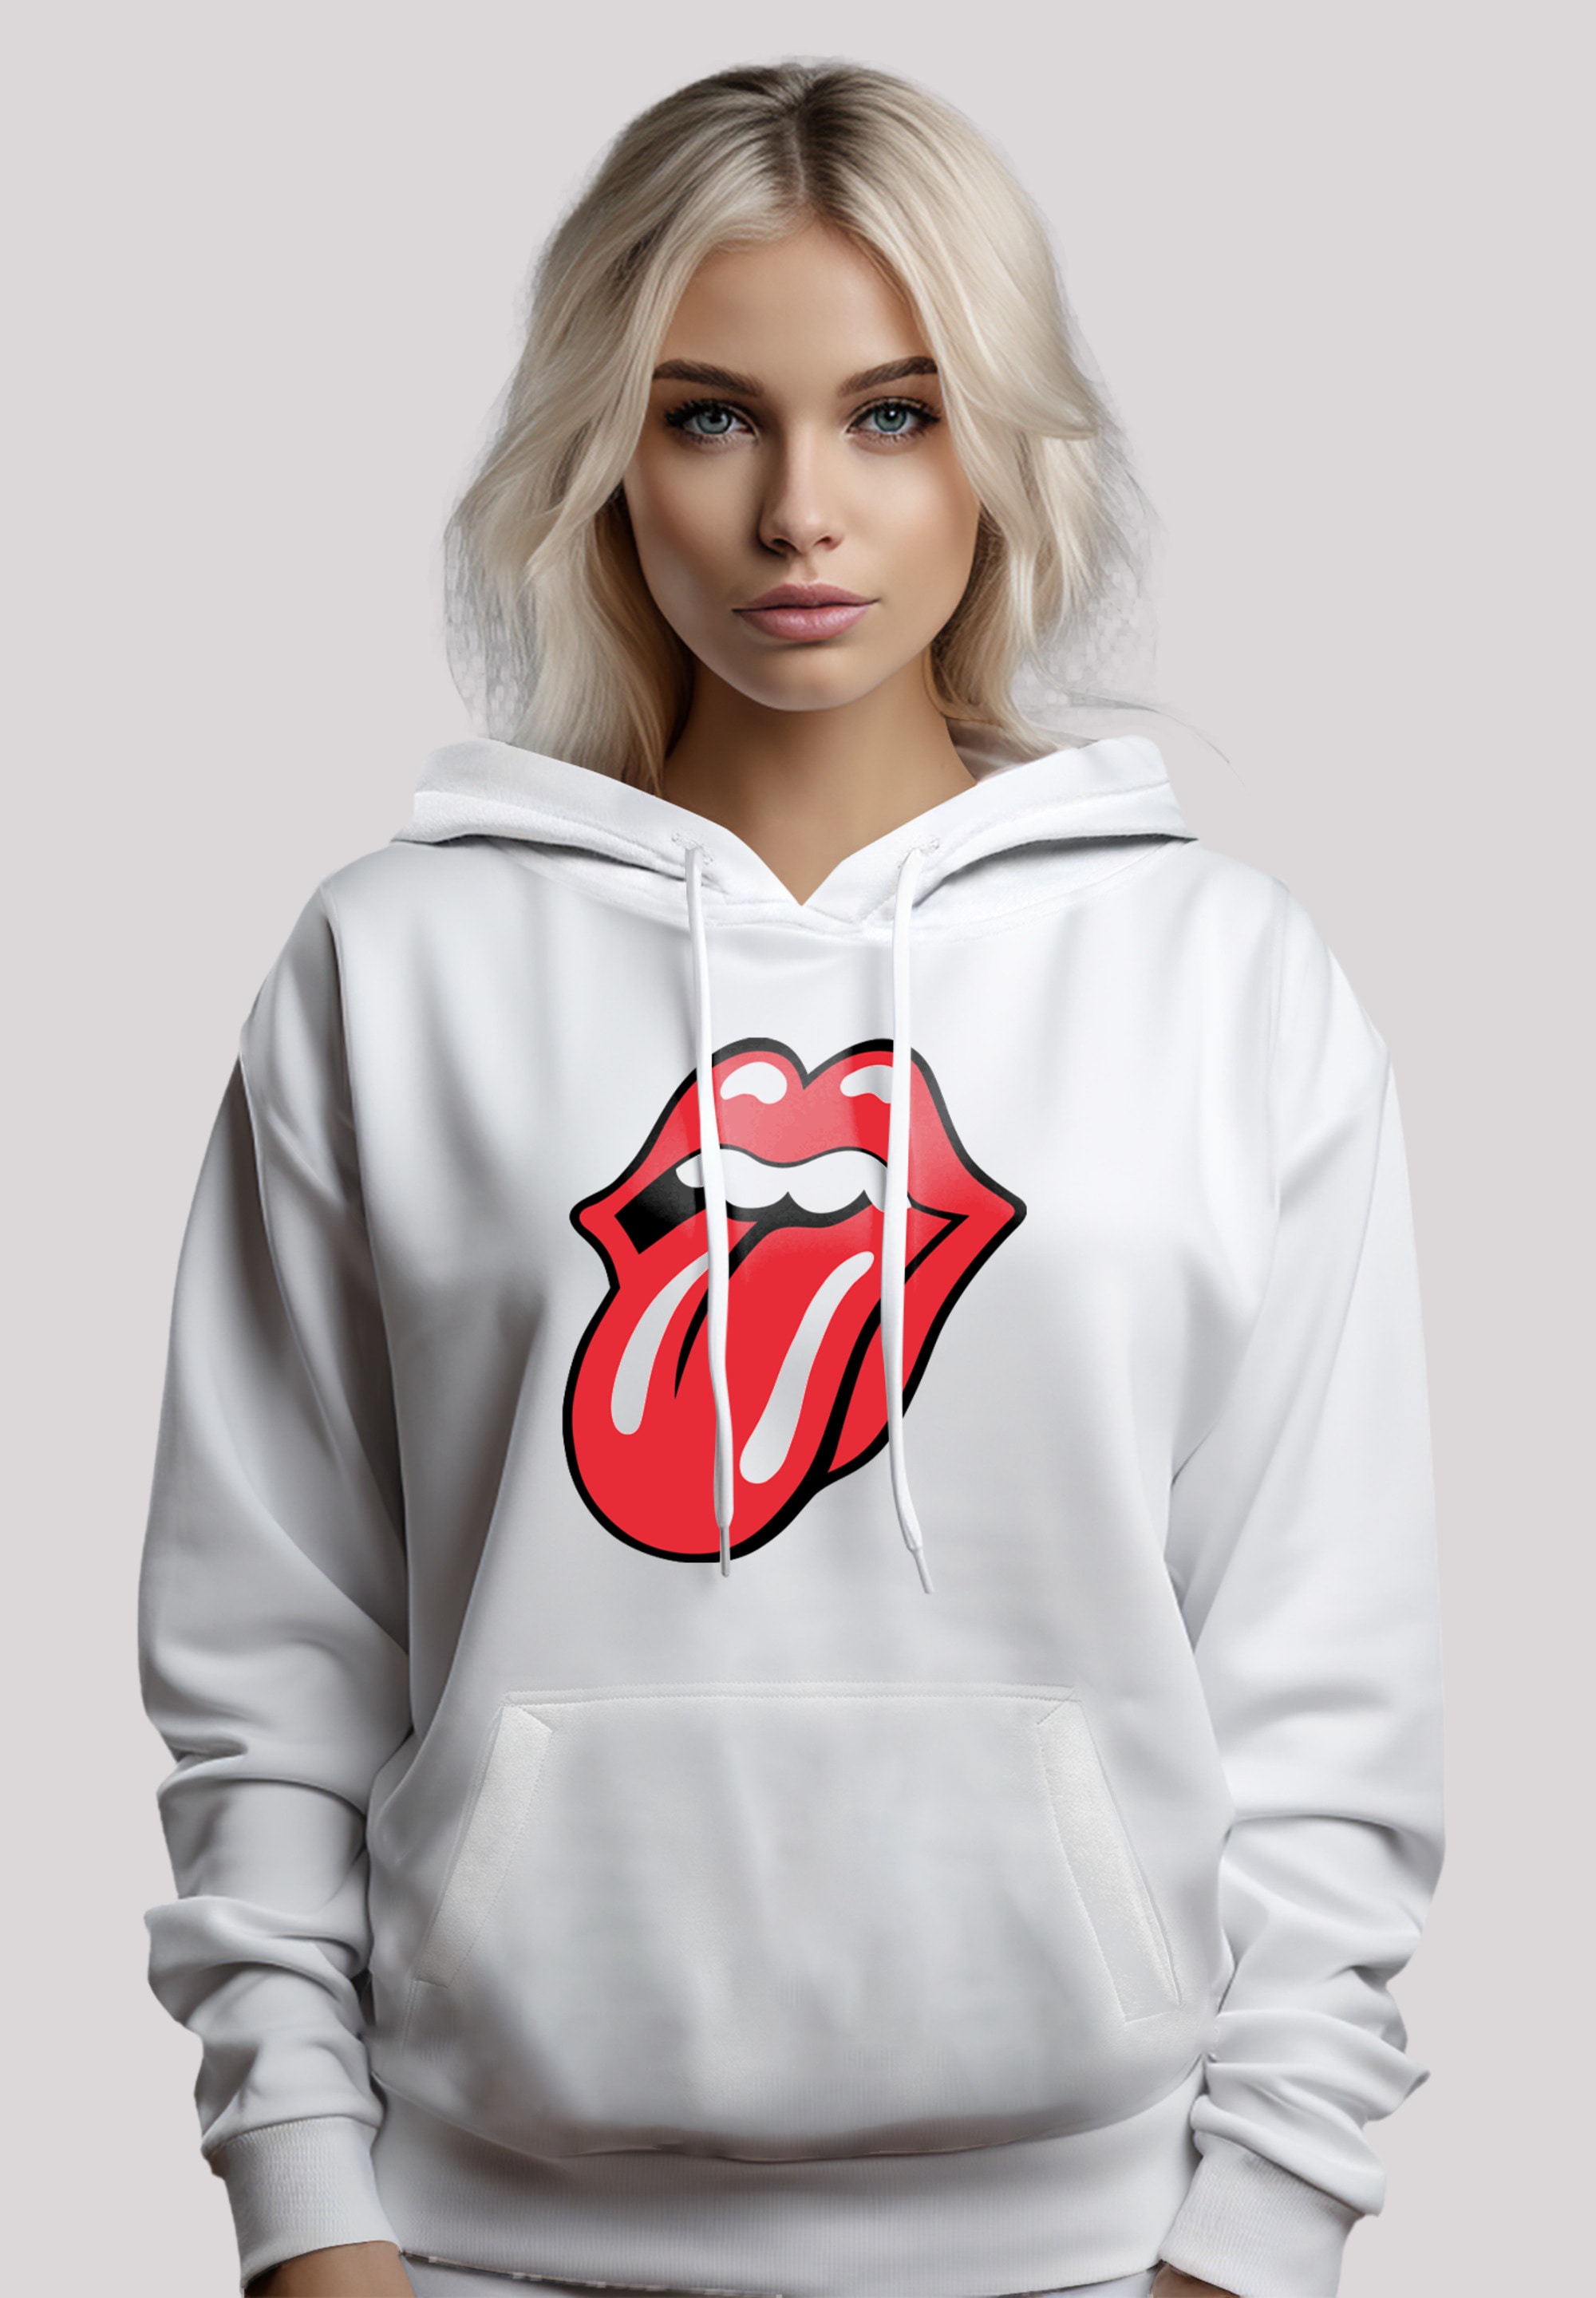 F4NT4STIC Kapuzenpullover online walking Stones Classic Rock kaufen Rolling Warm, Bequem »The Band«, | Zunge I\'m Musik Hoodie